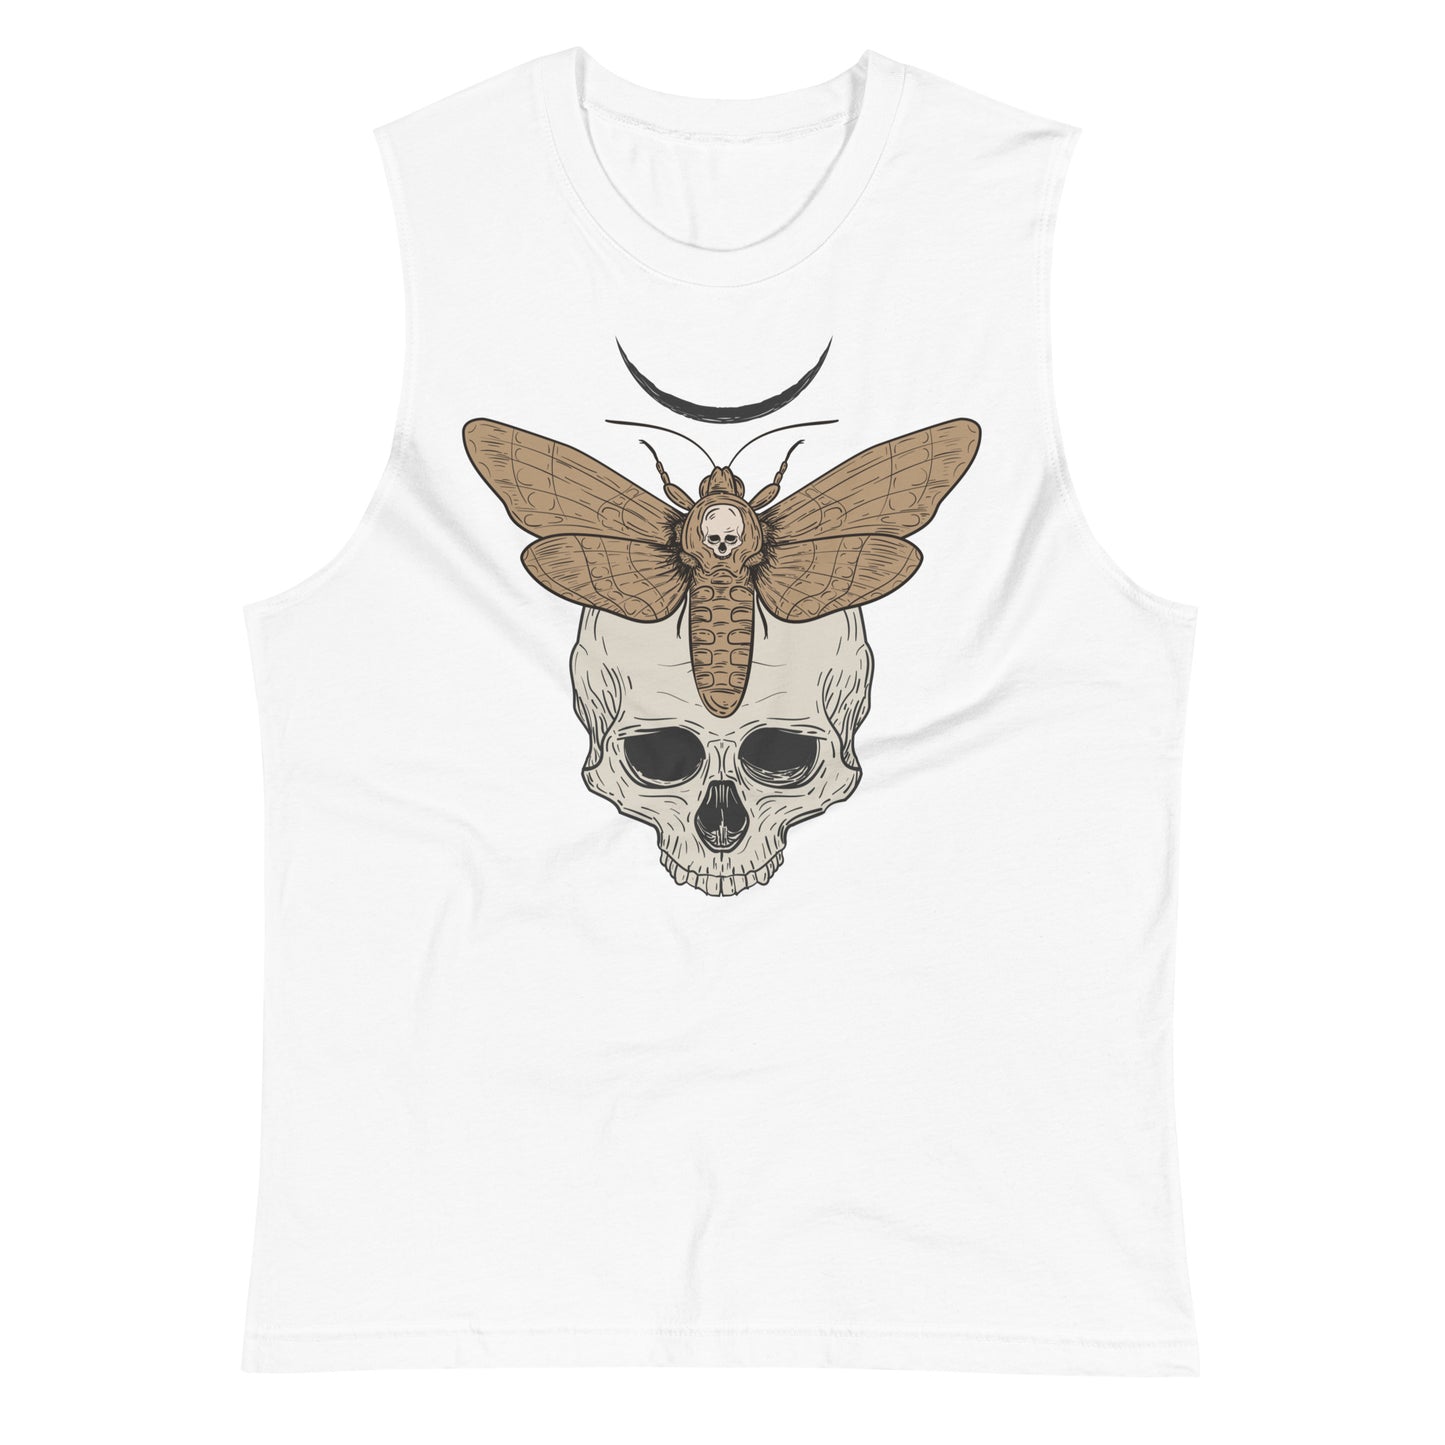 Deathmoth and Skull Muscle Shirt